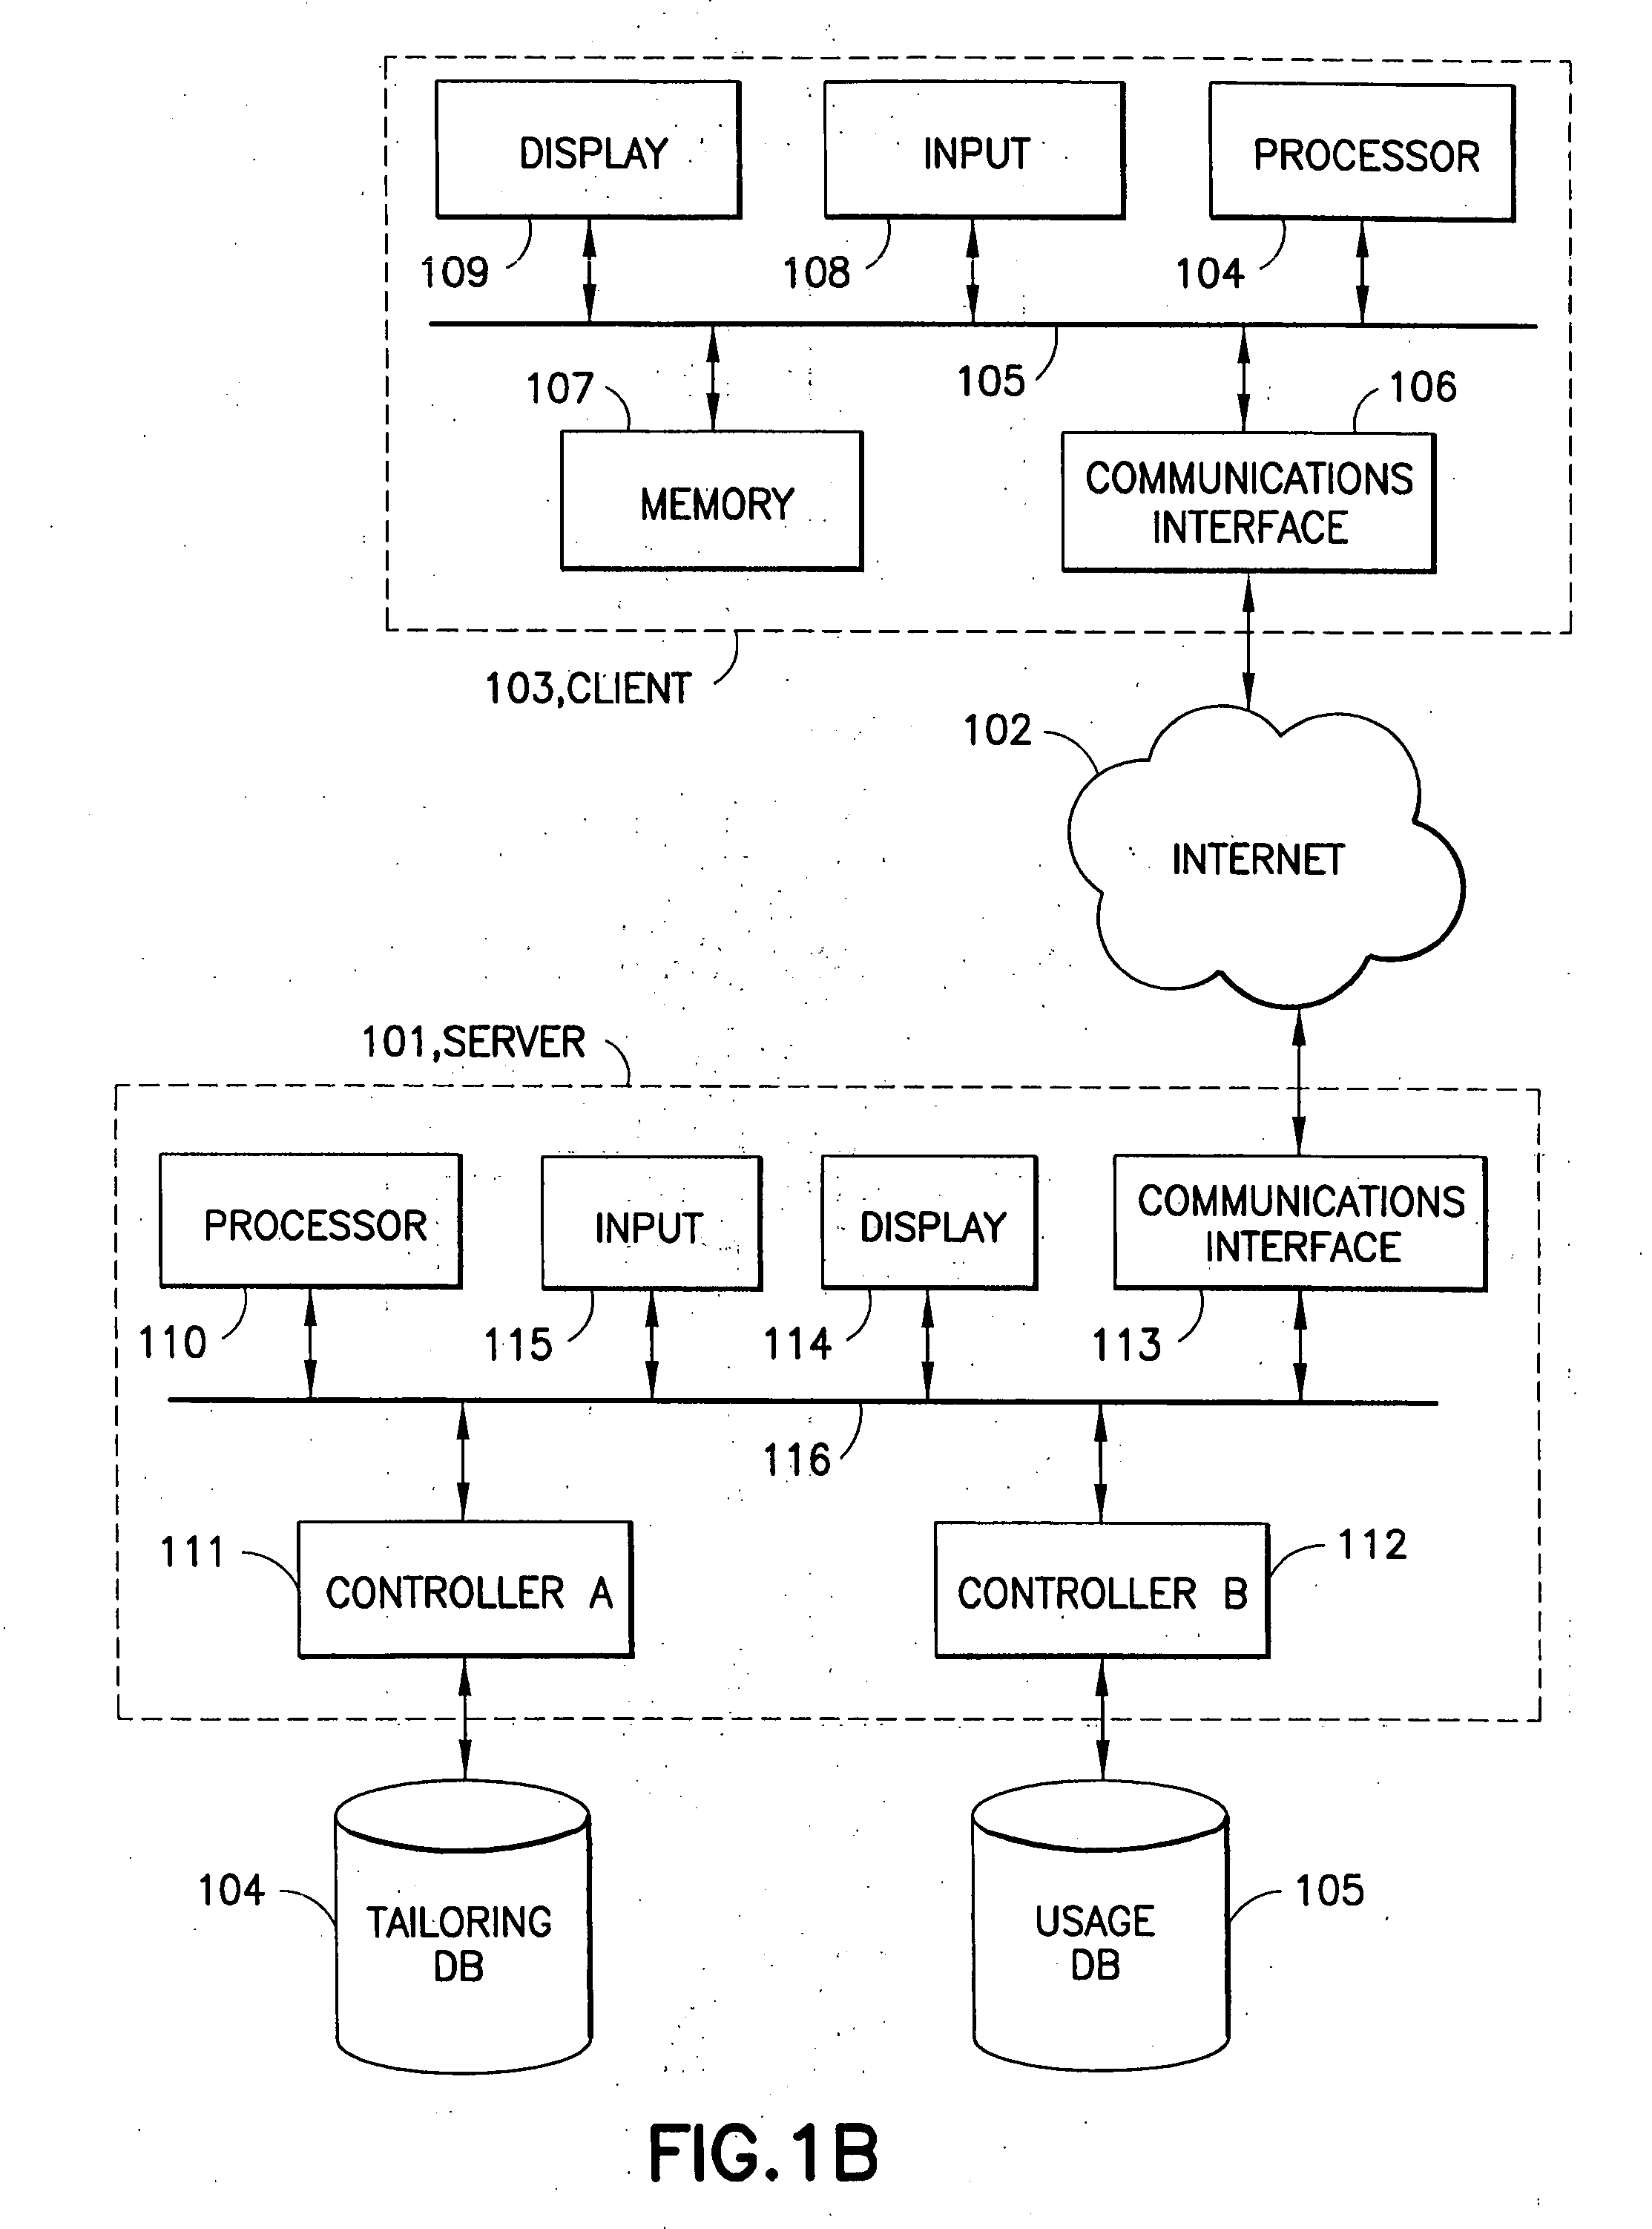 System, method and computer program product for shared user tailoring of websites